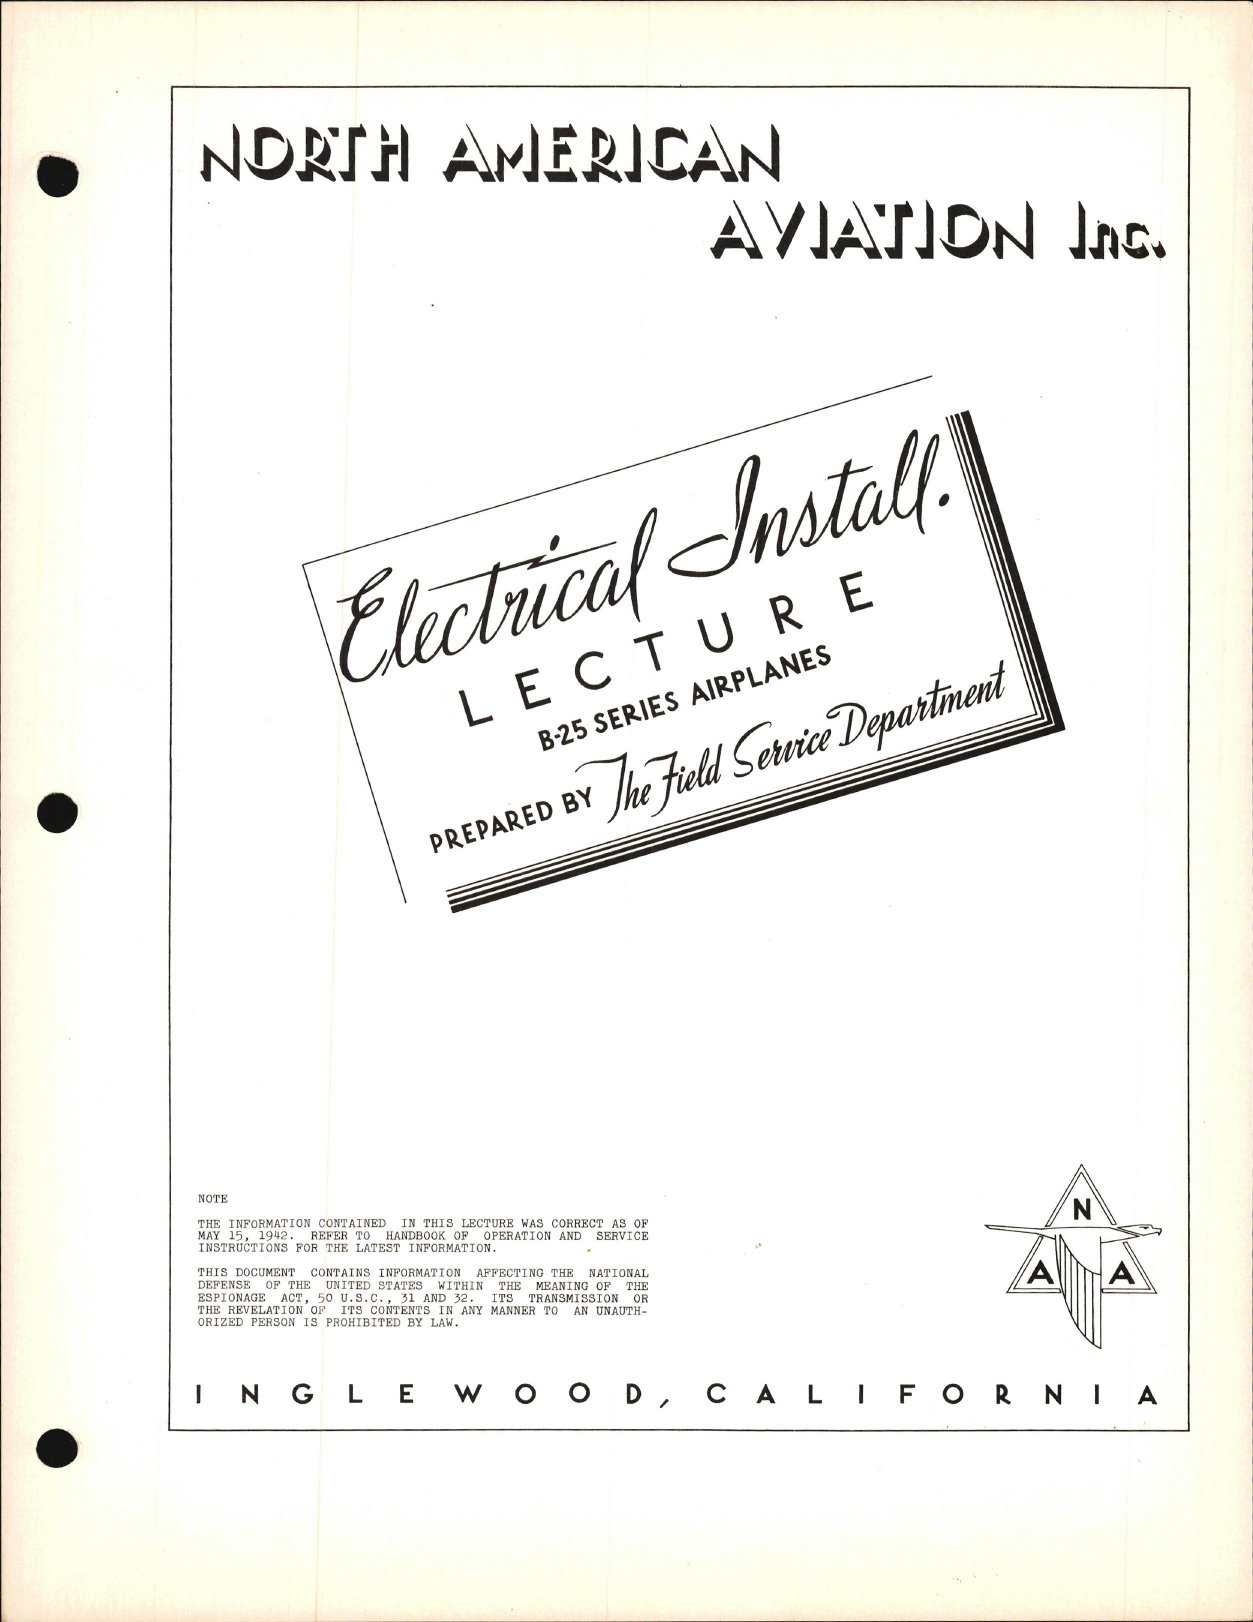 Sample page 1 from AirCorps Library document: Service School Lectures - Electrical Install 